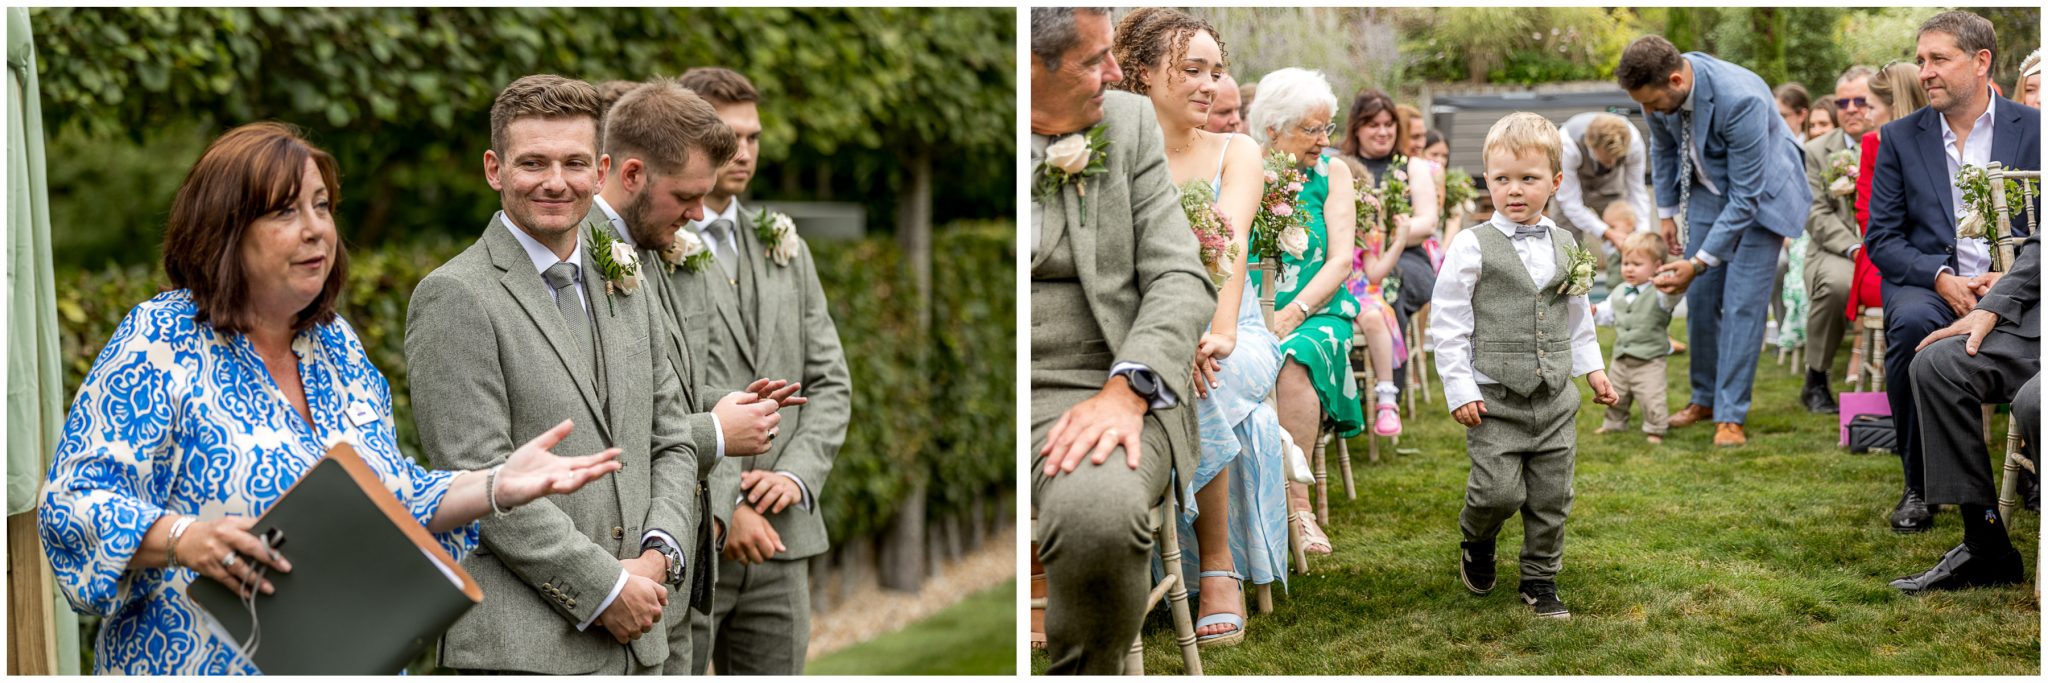 The celebrant welcomes guests to the wedding as the page boy walks down the aisle